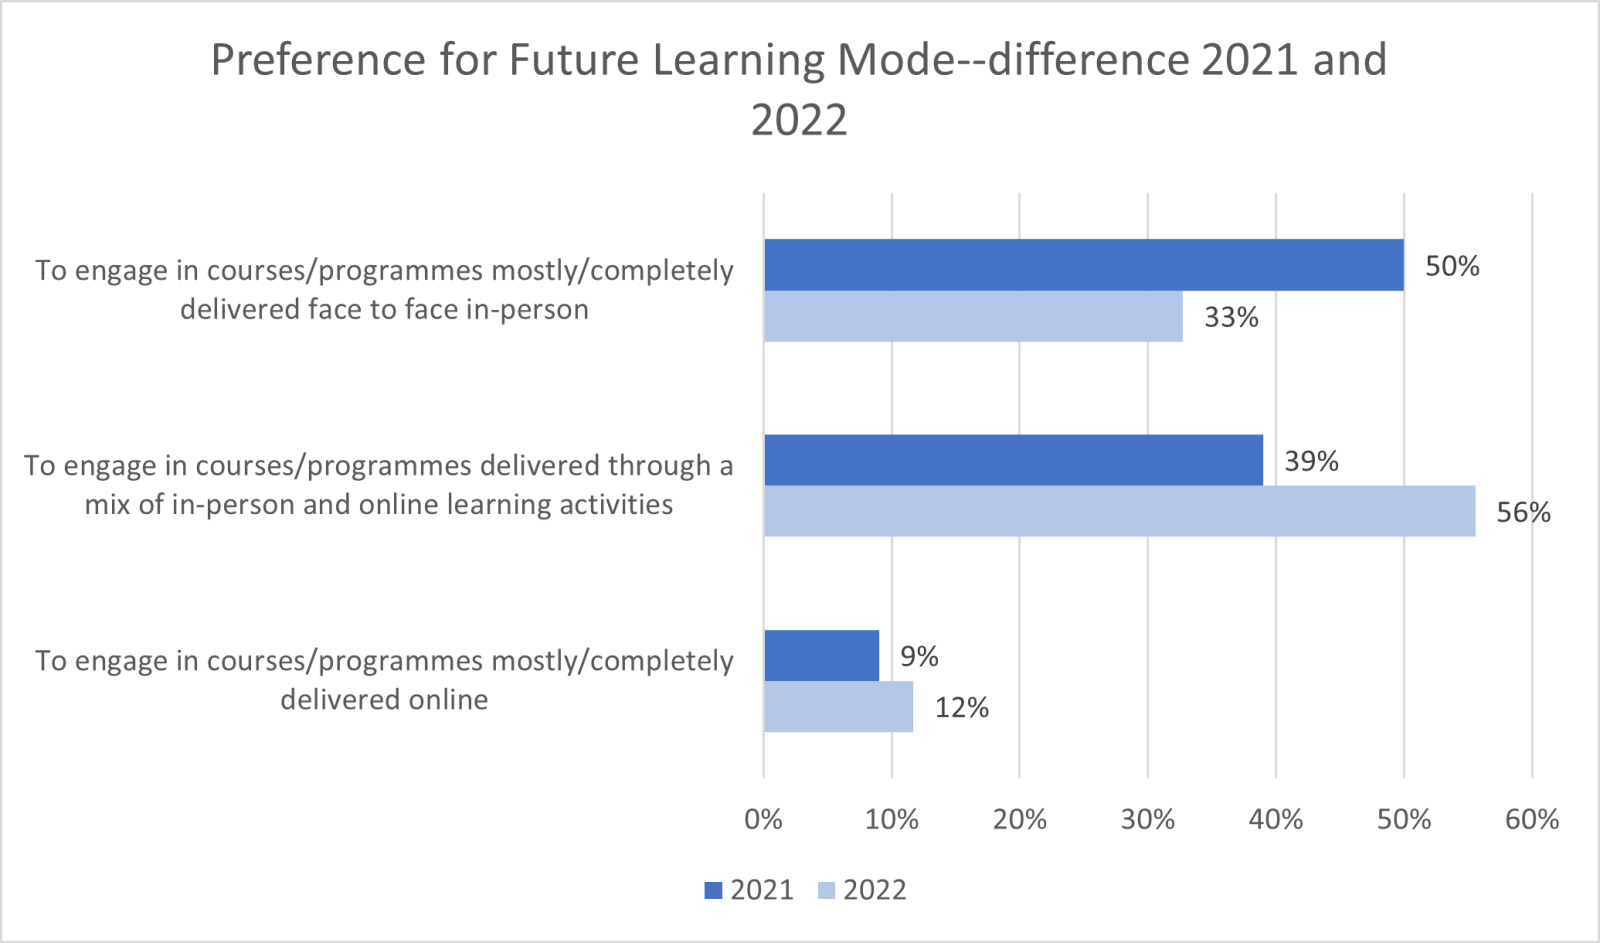 A bar chart of the statistics for student's preferences for future learning mode and the difference between the years 2021 and 2022. In 2022, 33 percent of participants stated that they preferred to engage with their studies face to face, compared to 50 percent in 2021. in 2022 56 percent preferred blended learning, compared to 39 percent in 2021. Finally, in 2022 12 percent stated a preference for online engagement compared to 9 percent in 2021.